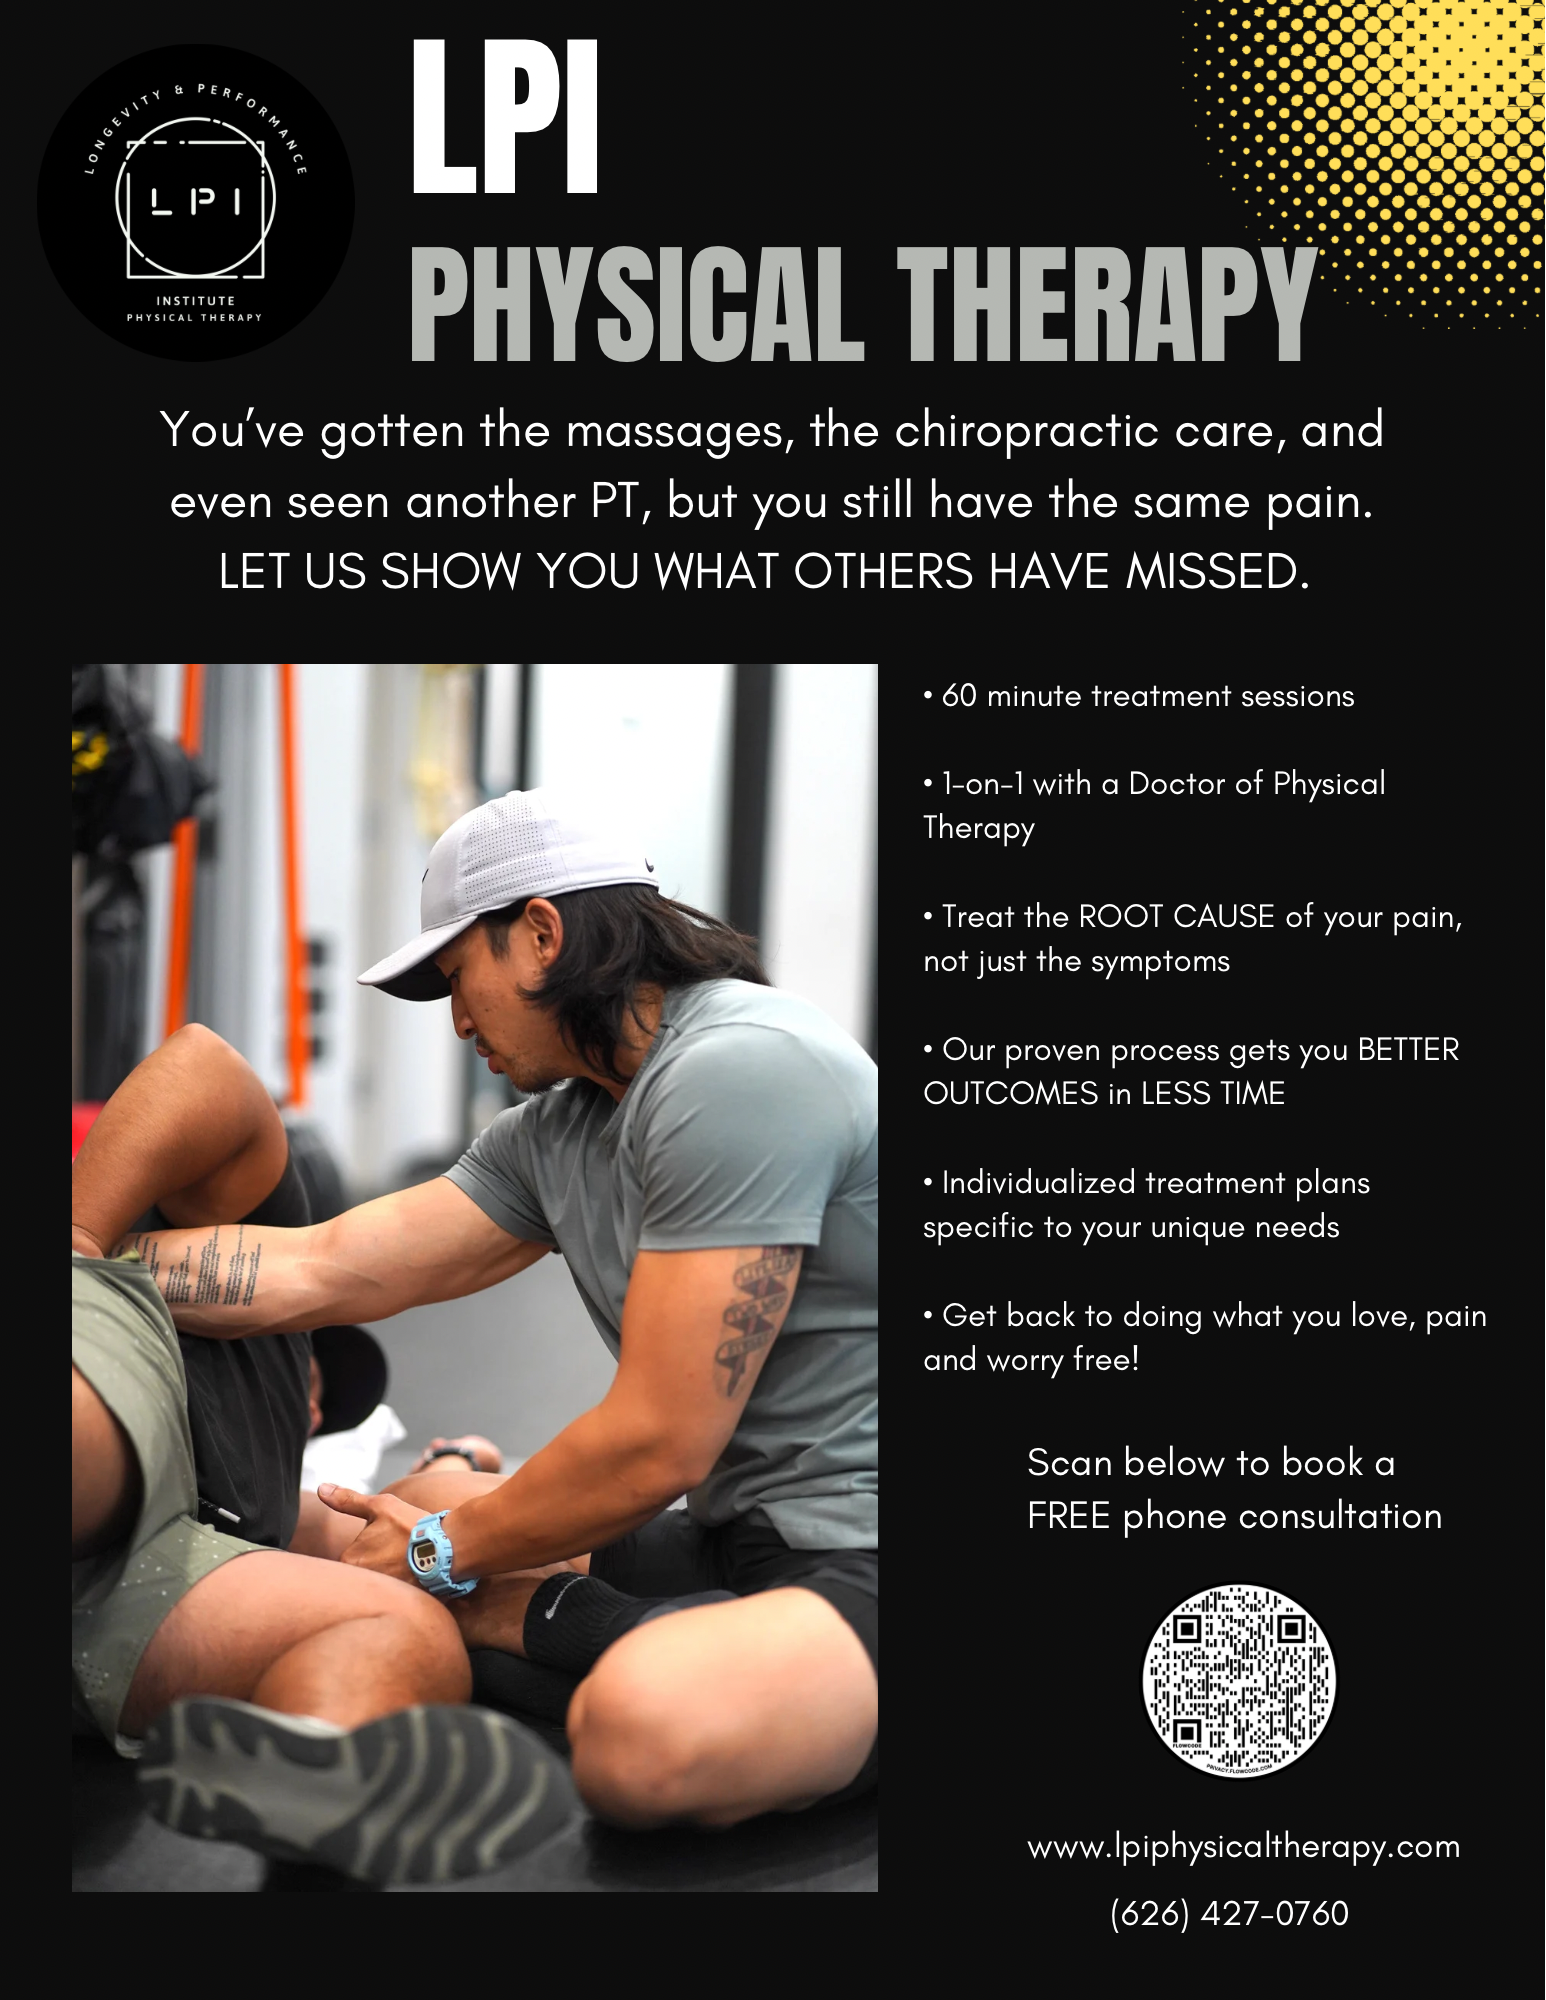 Longevity & Performance Institute (LPI Physical Therapy) flyer 